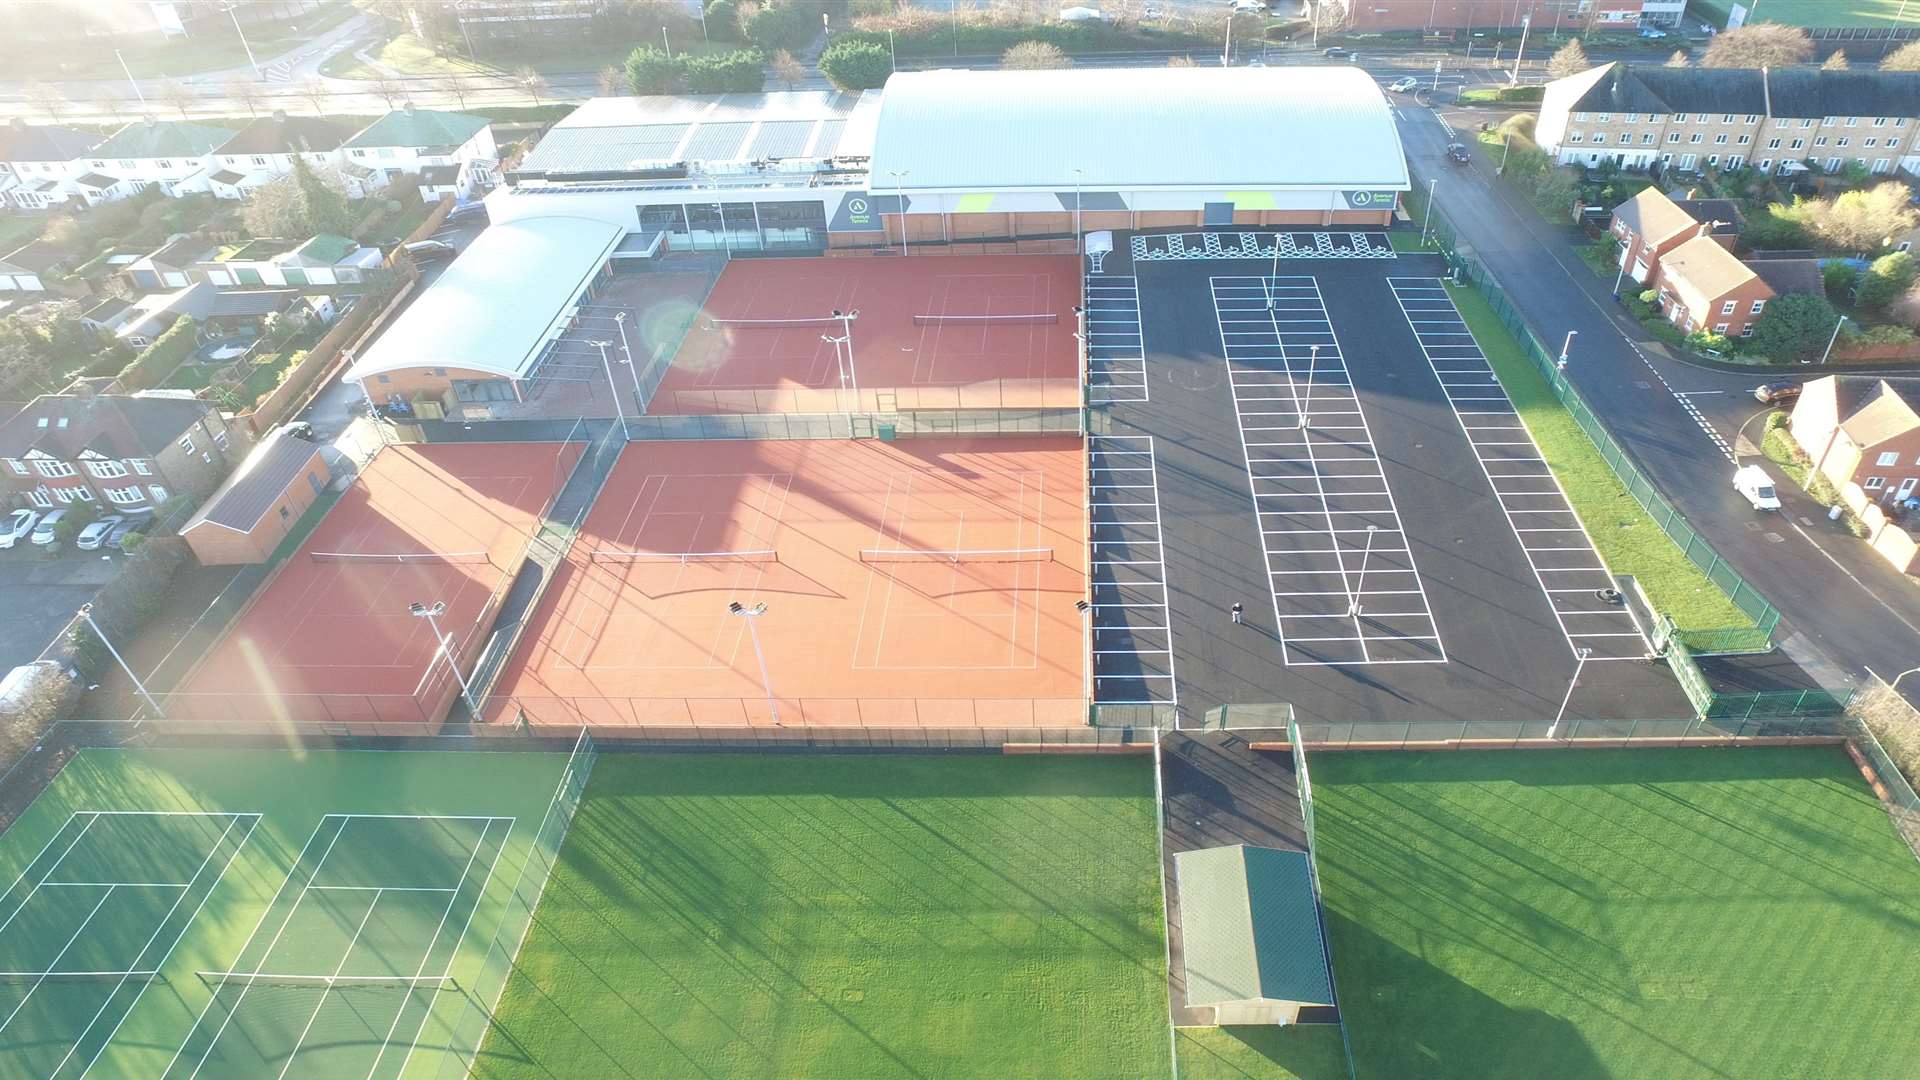 The tennis centre is taking shape